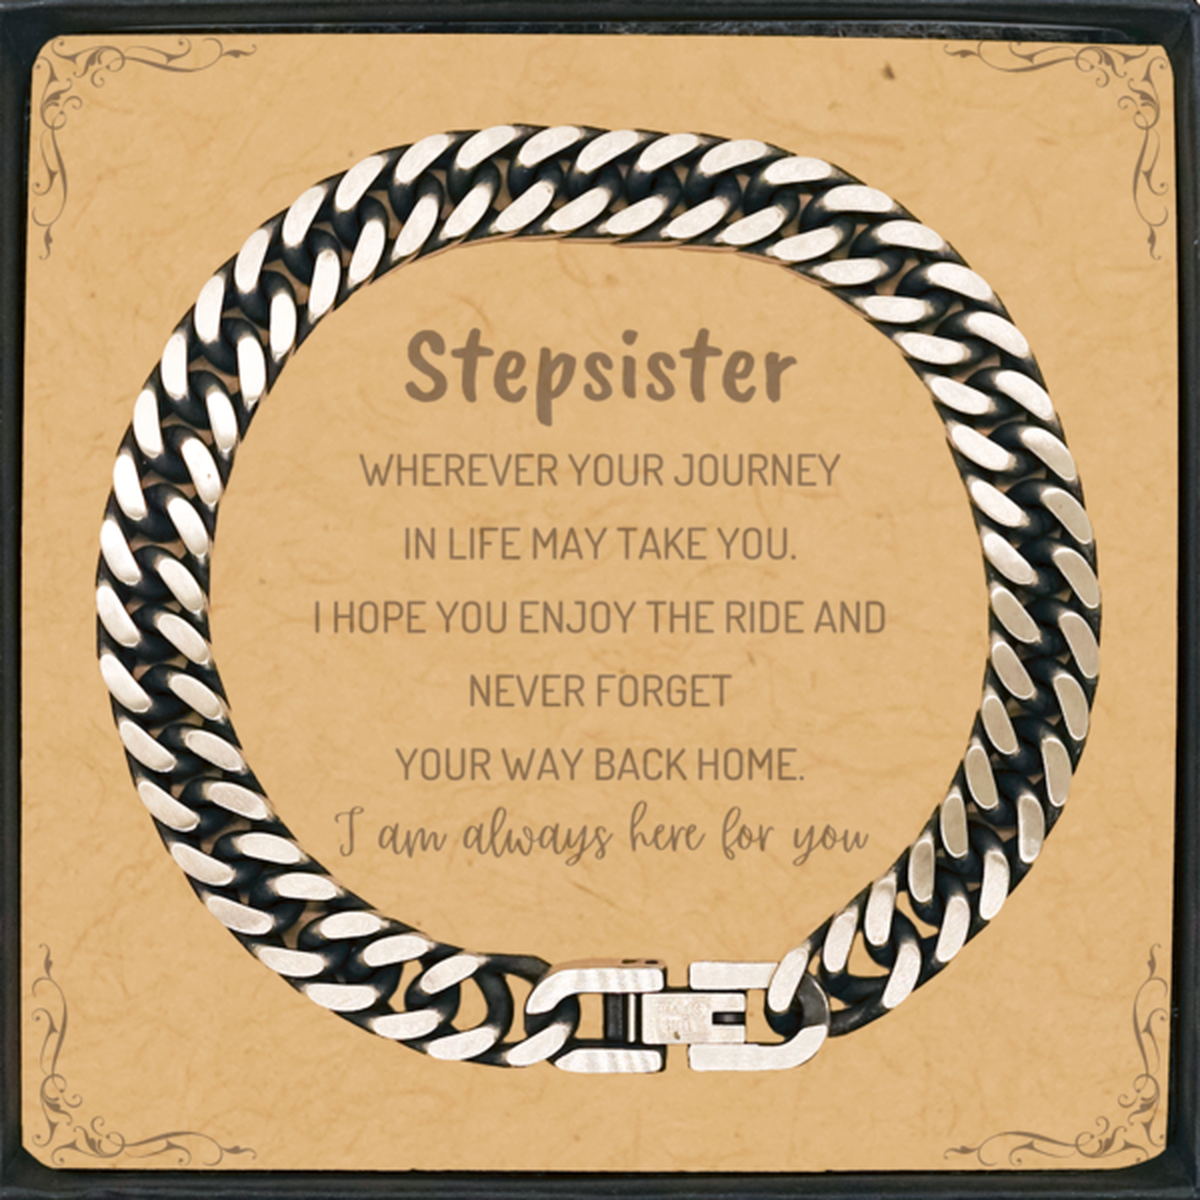 Stepsister wherever your journey in life may take you, I am always here for you Stepsister Cuban Link Chain Bracelet, Awesome Christmas Gifts For Stepsister Message Card, Stepsister Birthday Gifts for Men Women Family Loved One